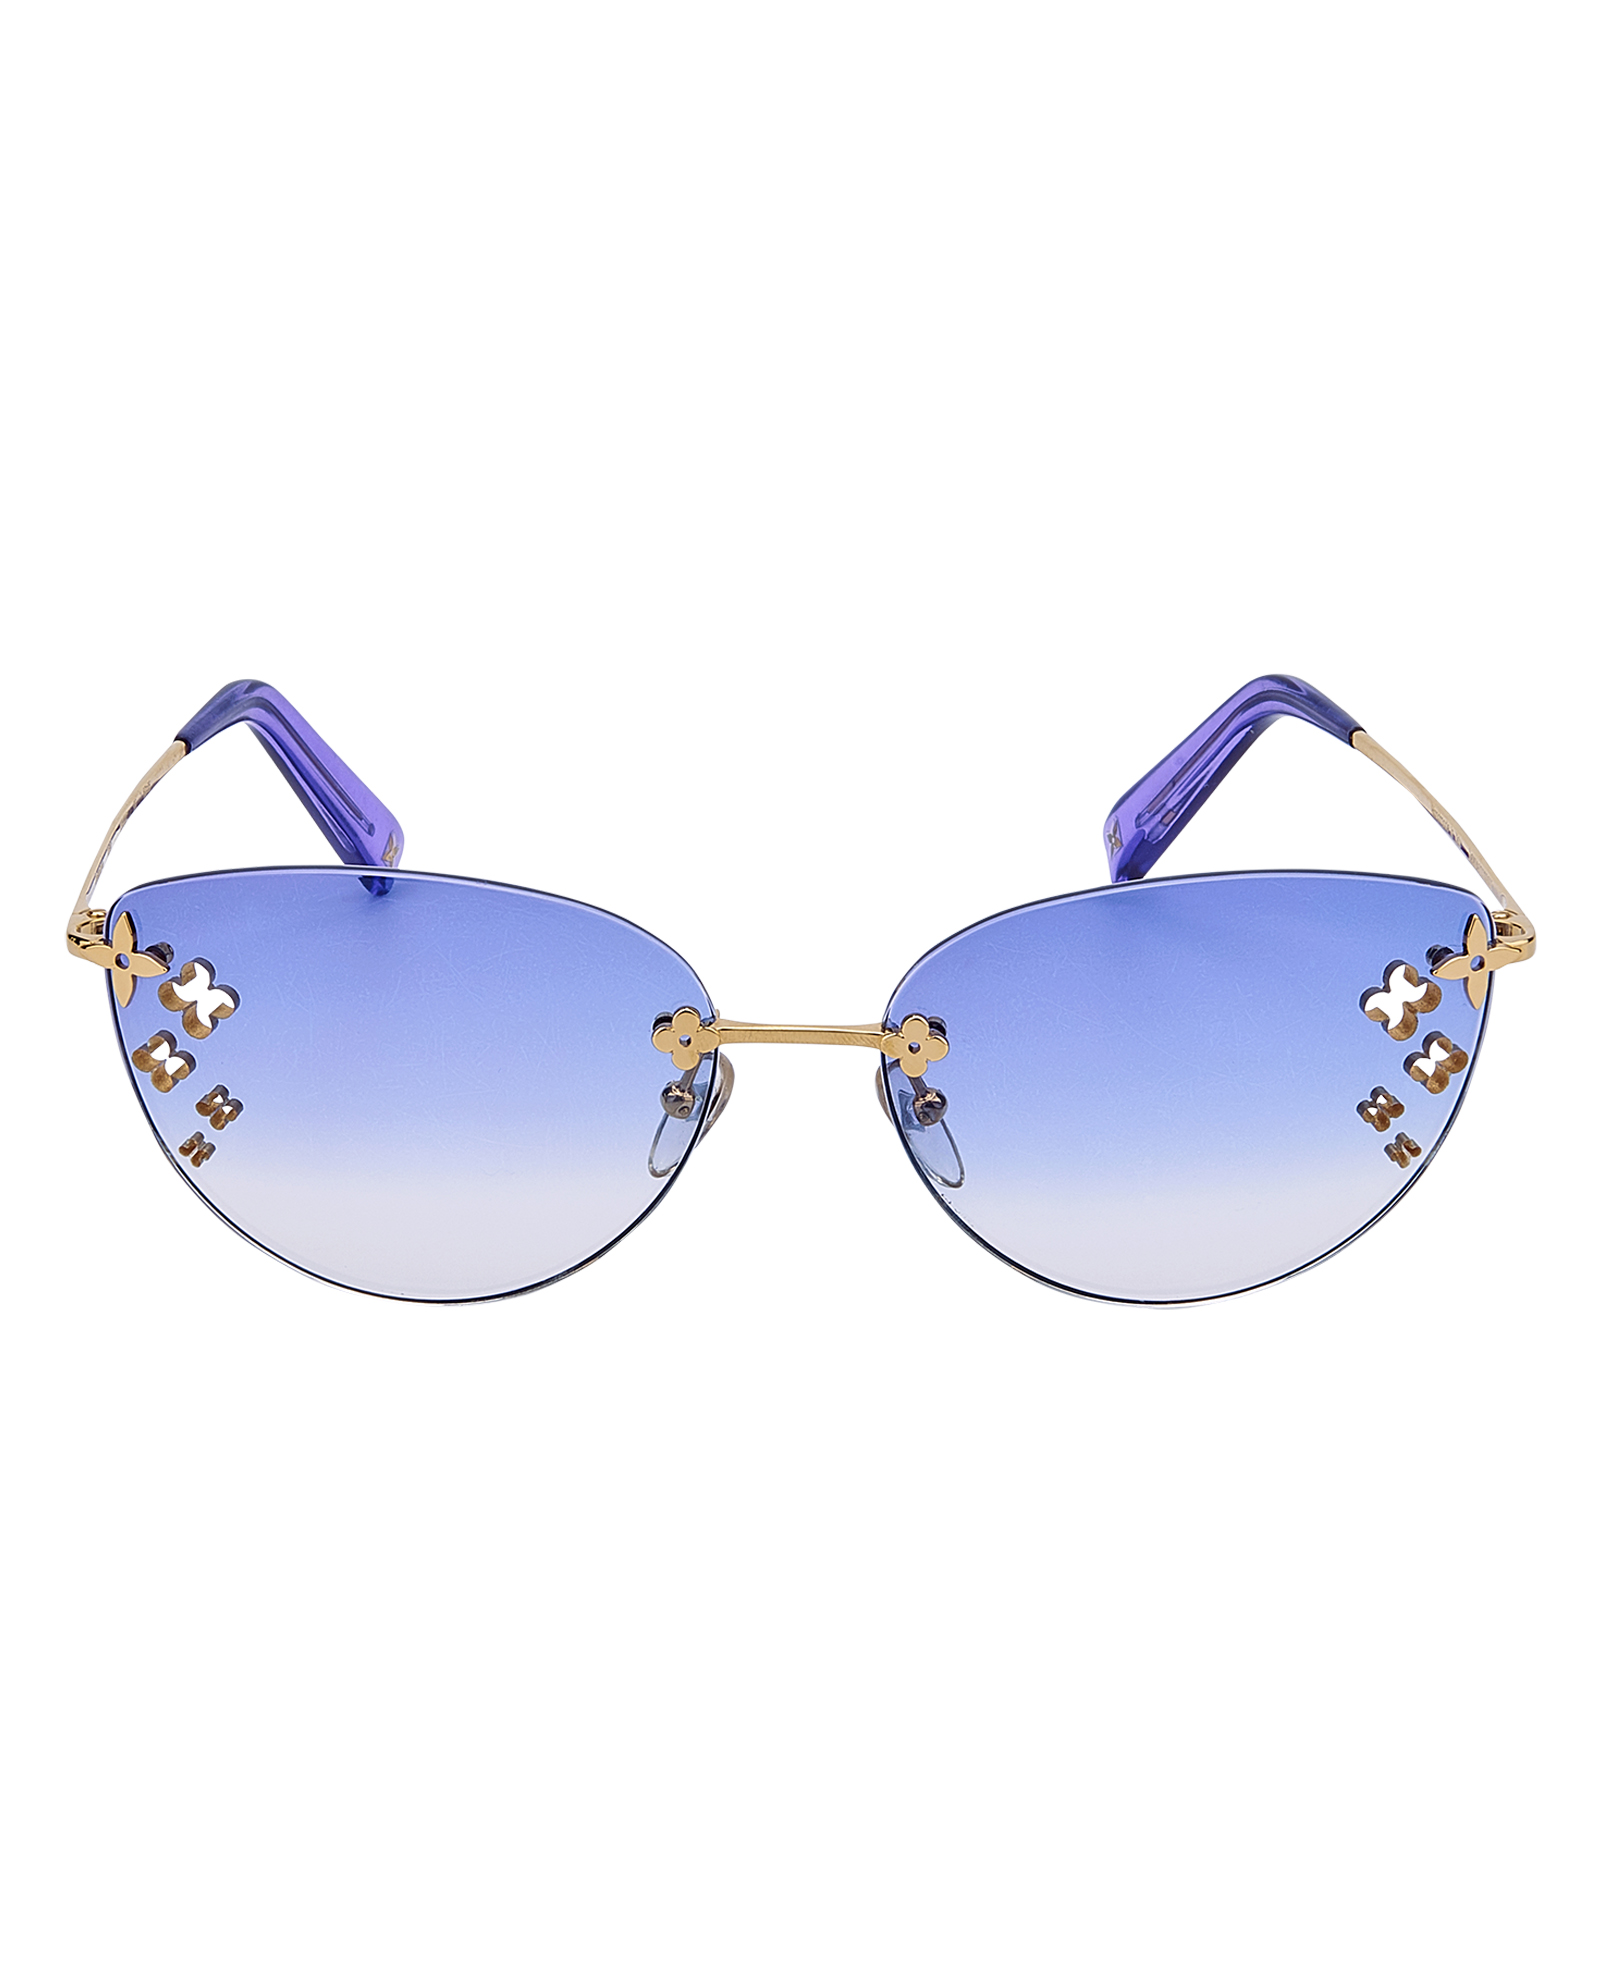 LOUIS VUITTON Sonnenbrille DESMAYO. — catalog Privately owned luxury -  jewelry, fashion, luxury accessories